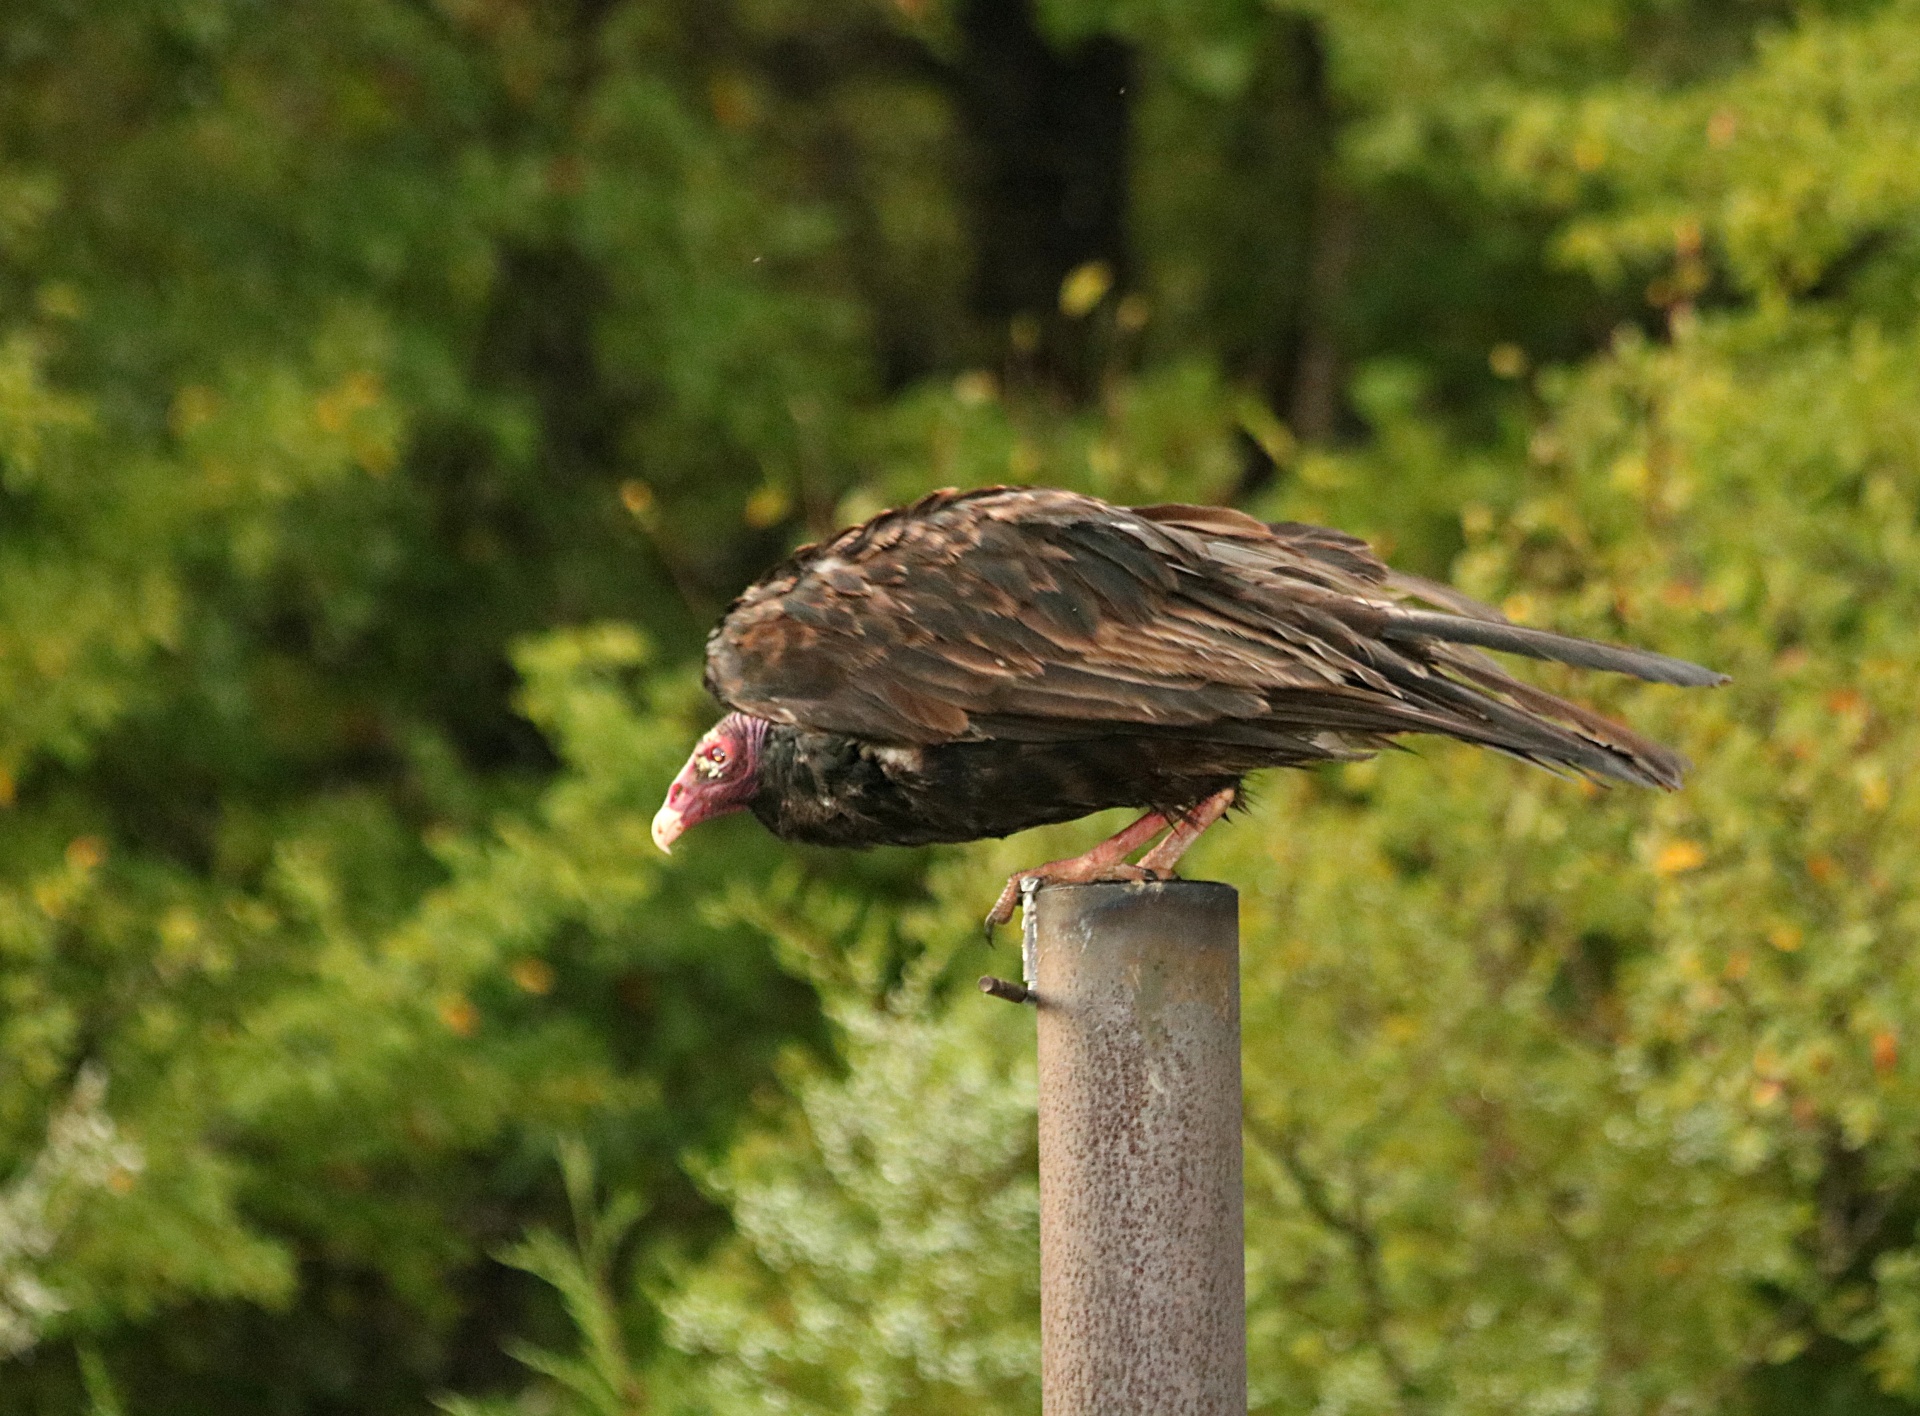 Close-up of a turkey buzzard about to take off in flight from the smoke stack of a meat cooker, showing slight movement, with green trees in the background.